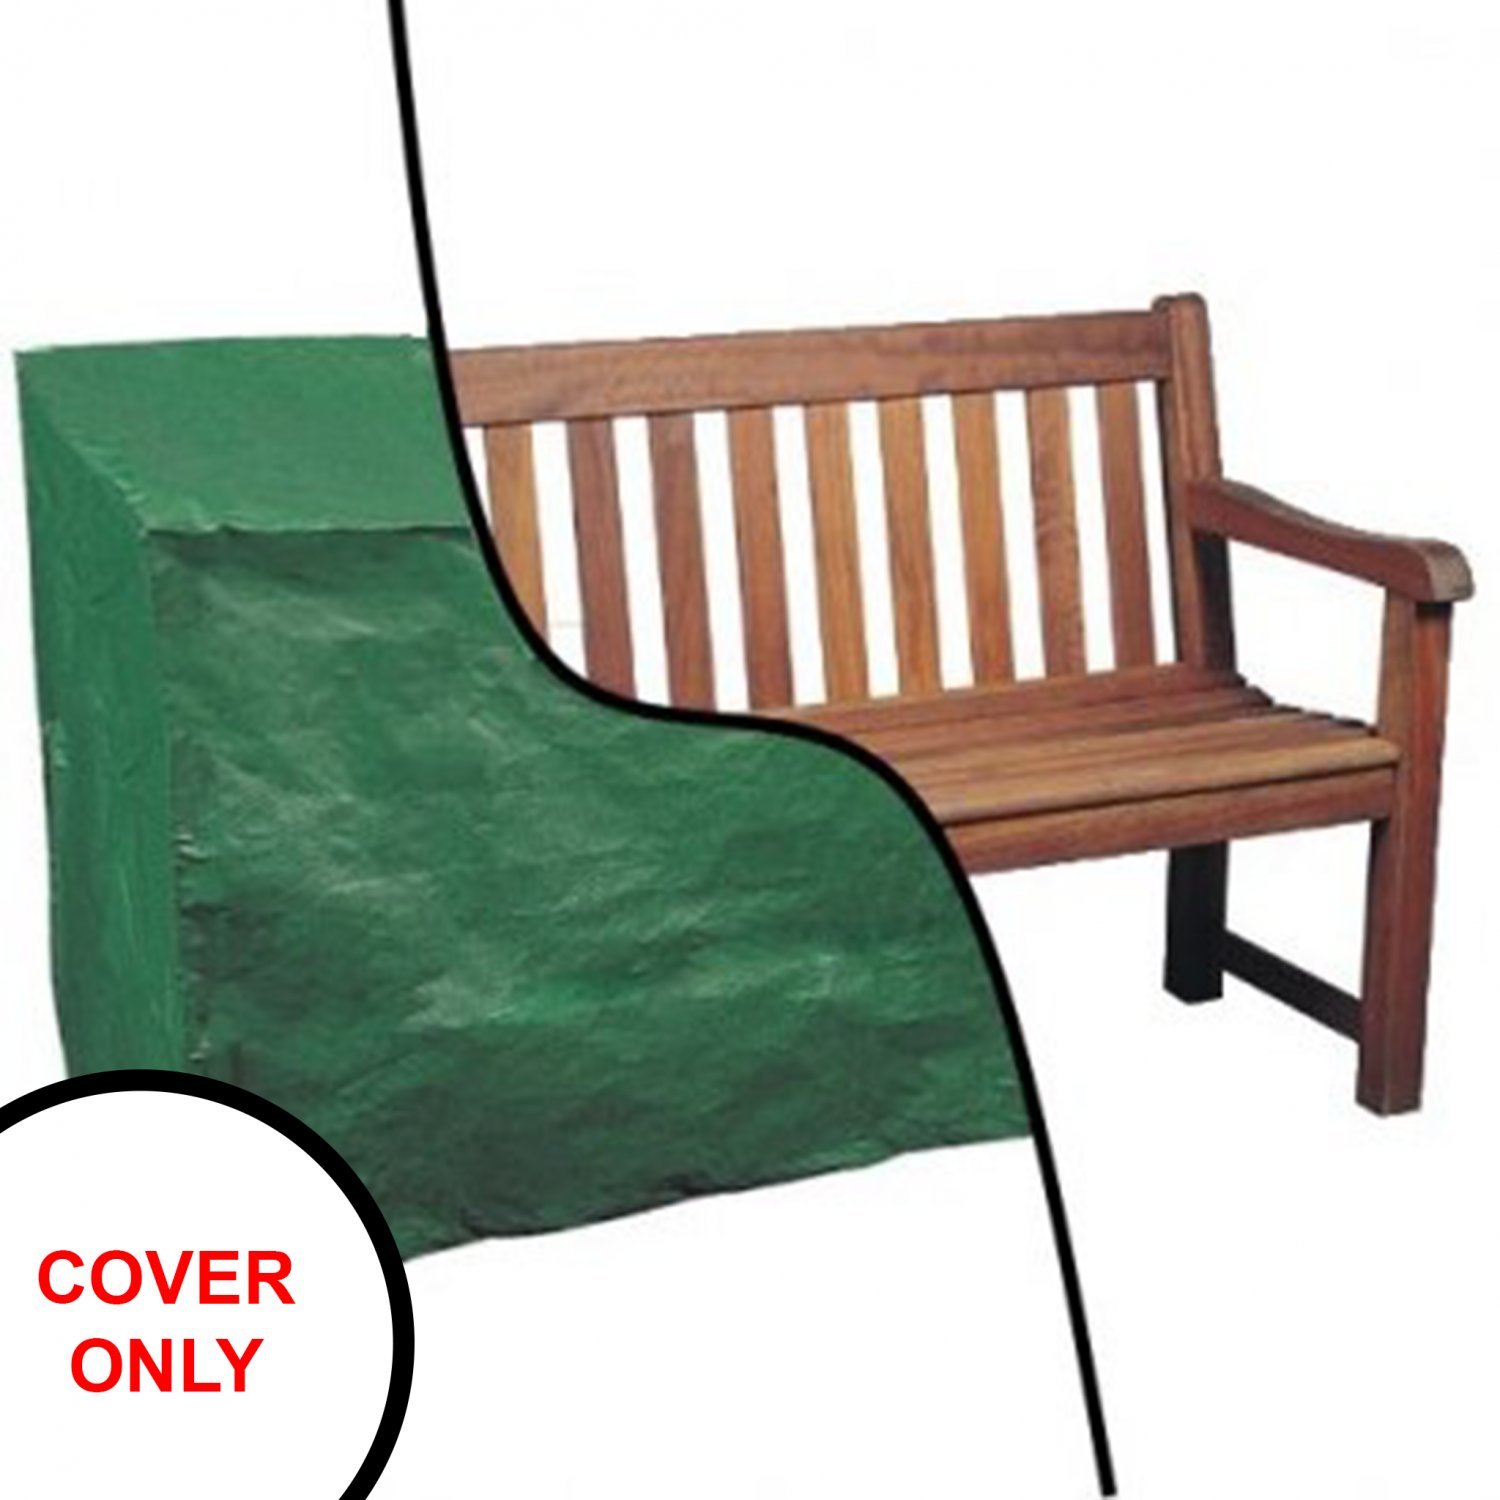 Waterproof 5ft 1.5m Garden Furniture 3 Seater Bench Seat Cover - Click Image to Close